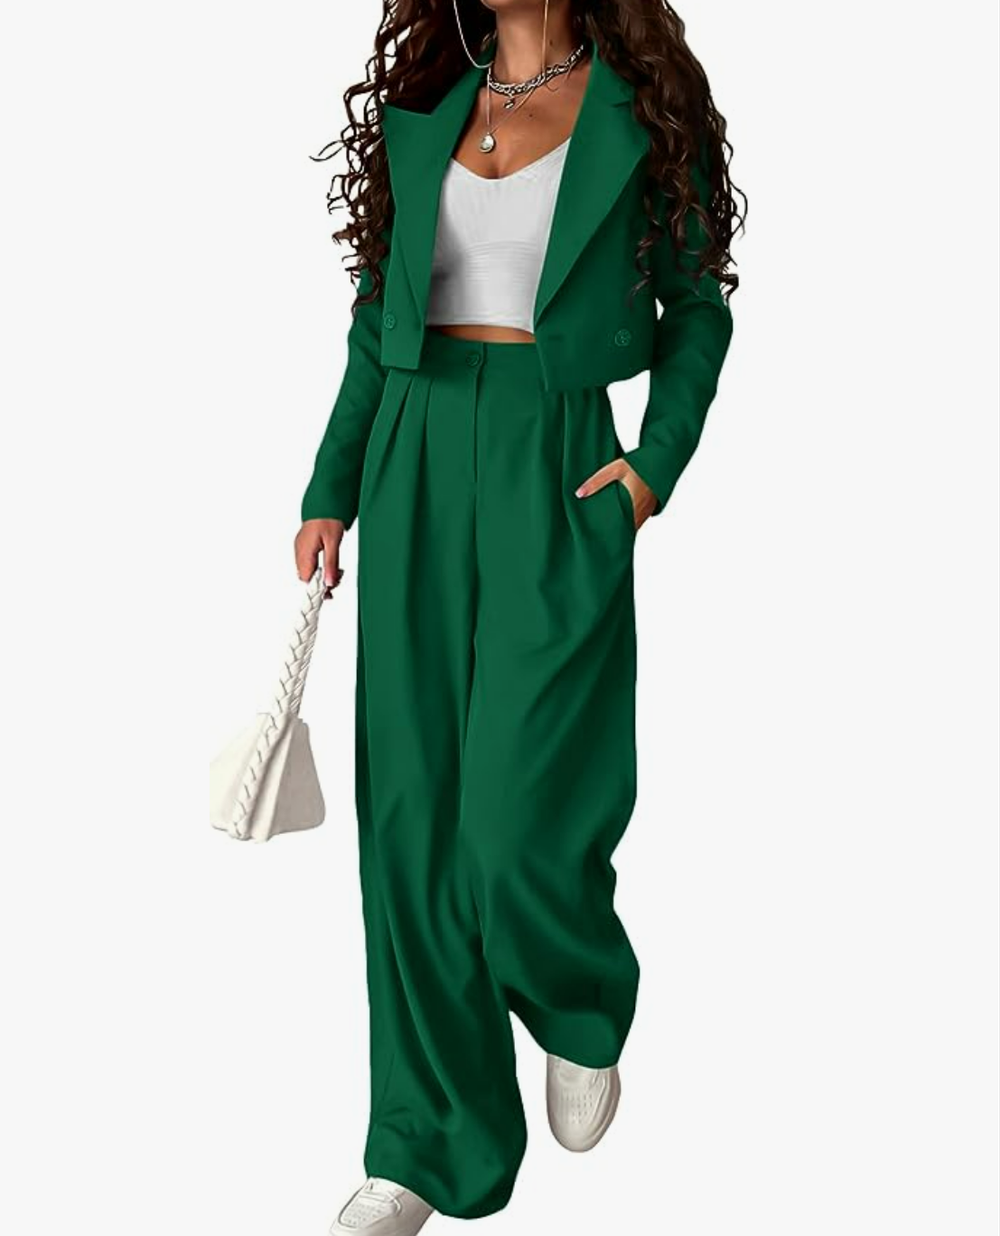 PRETTYGARDEN Women's 2 Piece Casual Outfits Cropped Blazer Jackets High Waisted Wide Leg Work Pants Suit Set.png